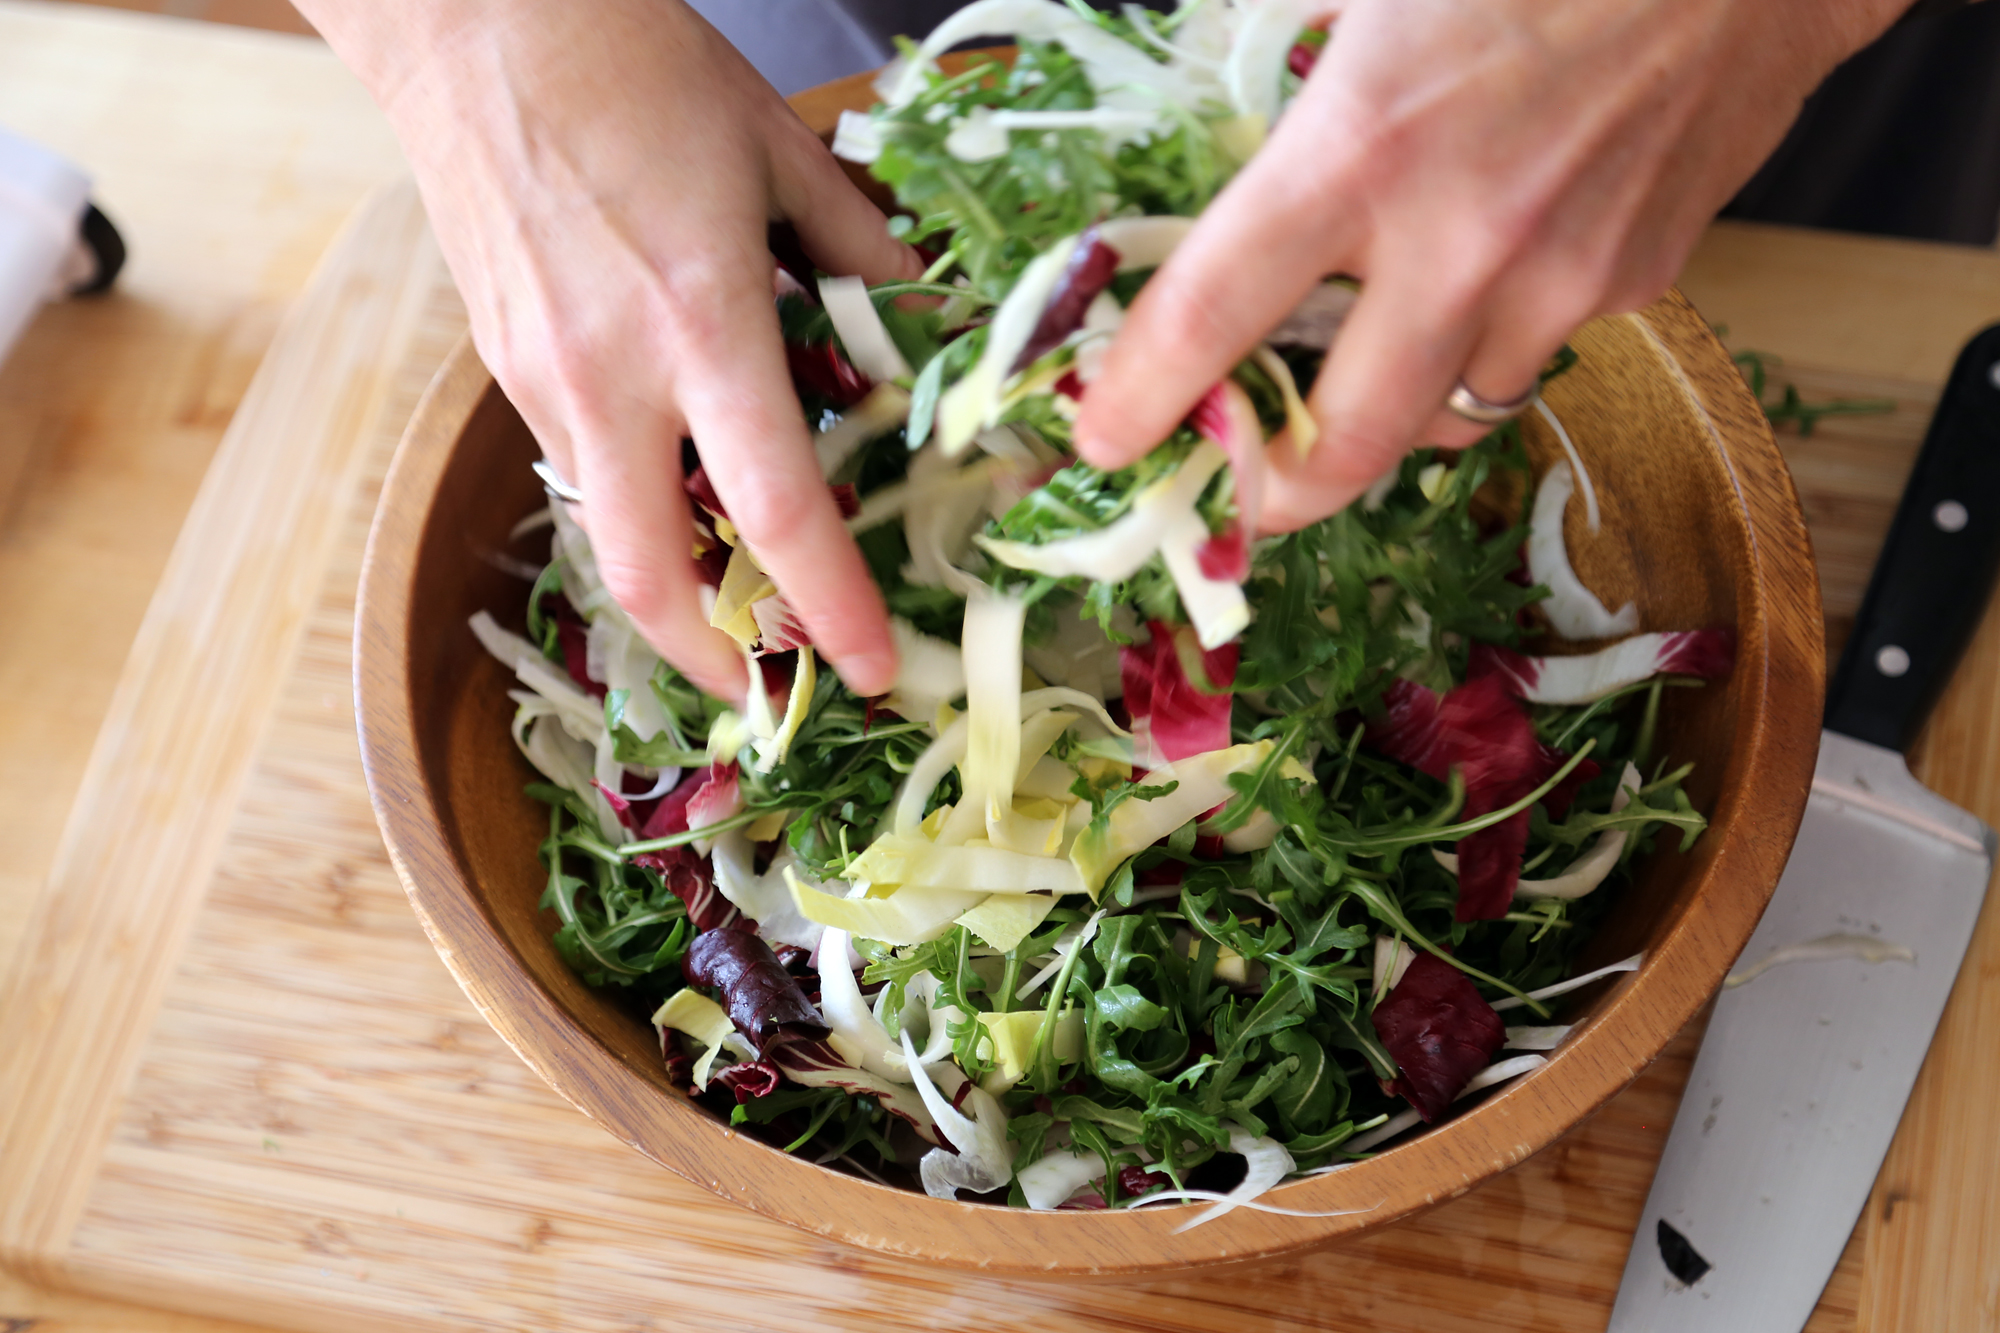 In a large salad bowl, toss together the arugula, radicchio, endive, fennel, and cilantro with a few tablespoons of the vinaigrette, enough to coat the leaves lightly.